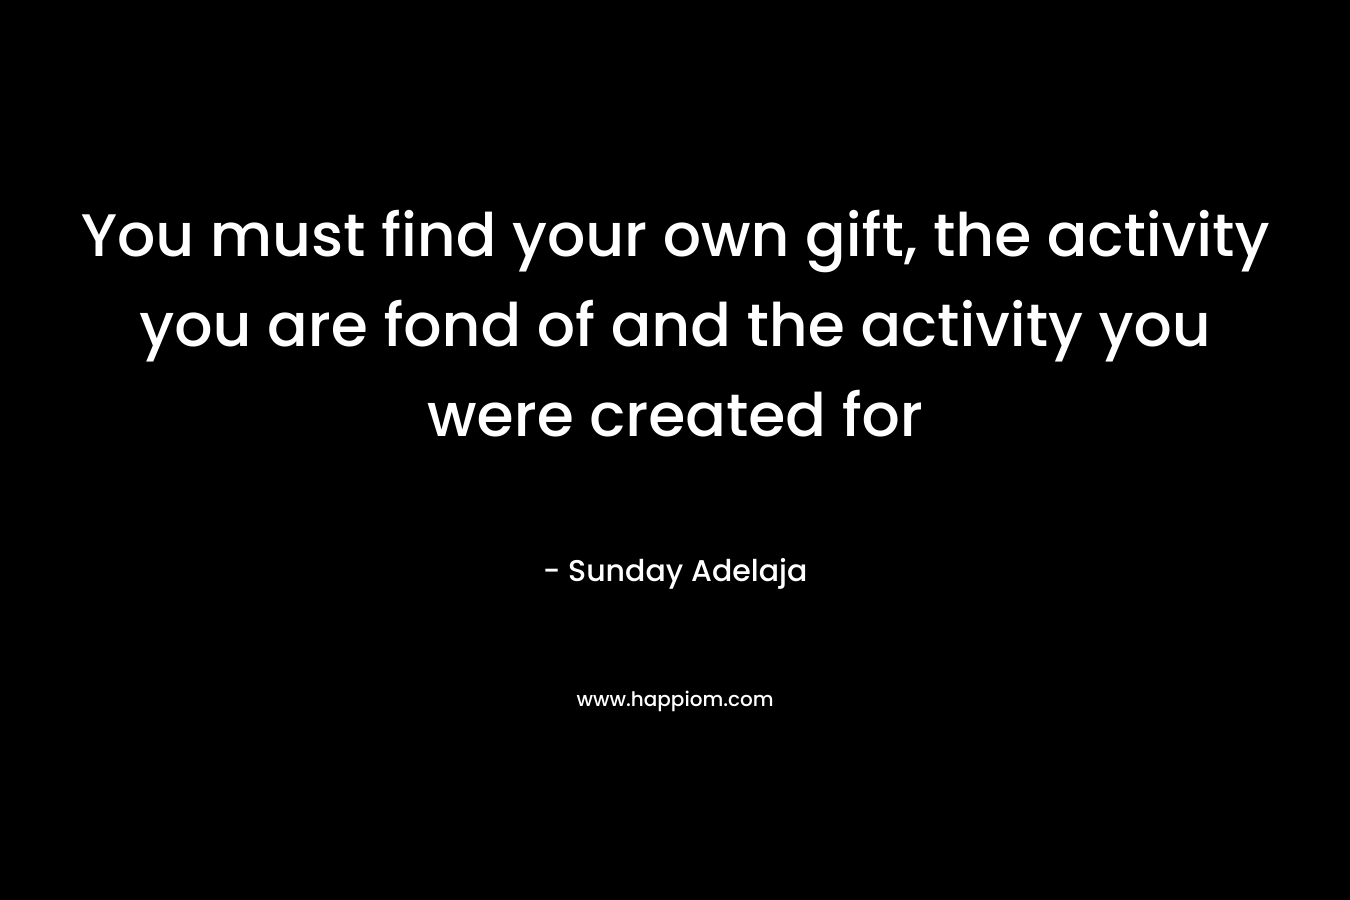 You must find your own gift, the activity you are fond of and the activity you were created for